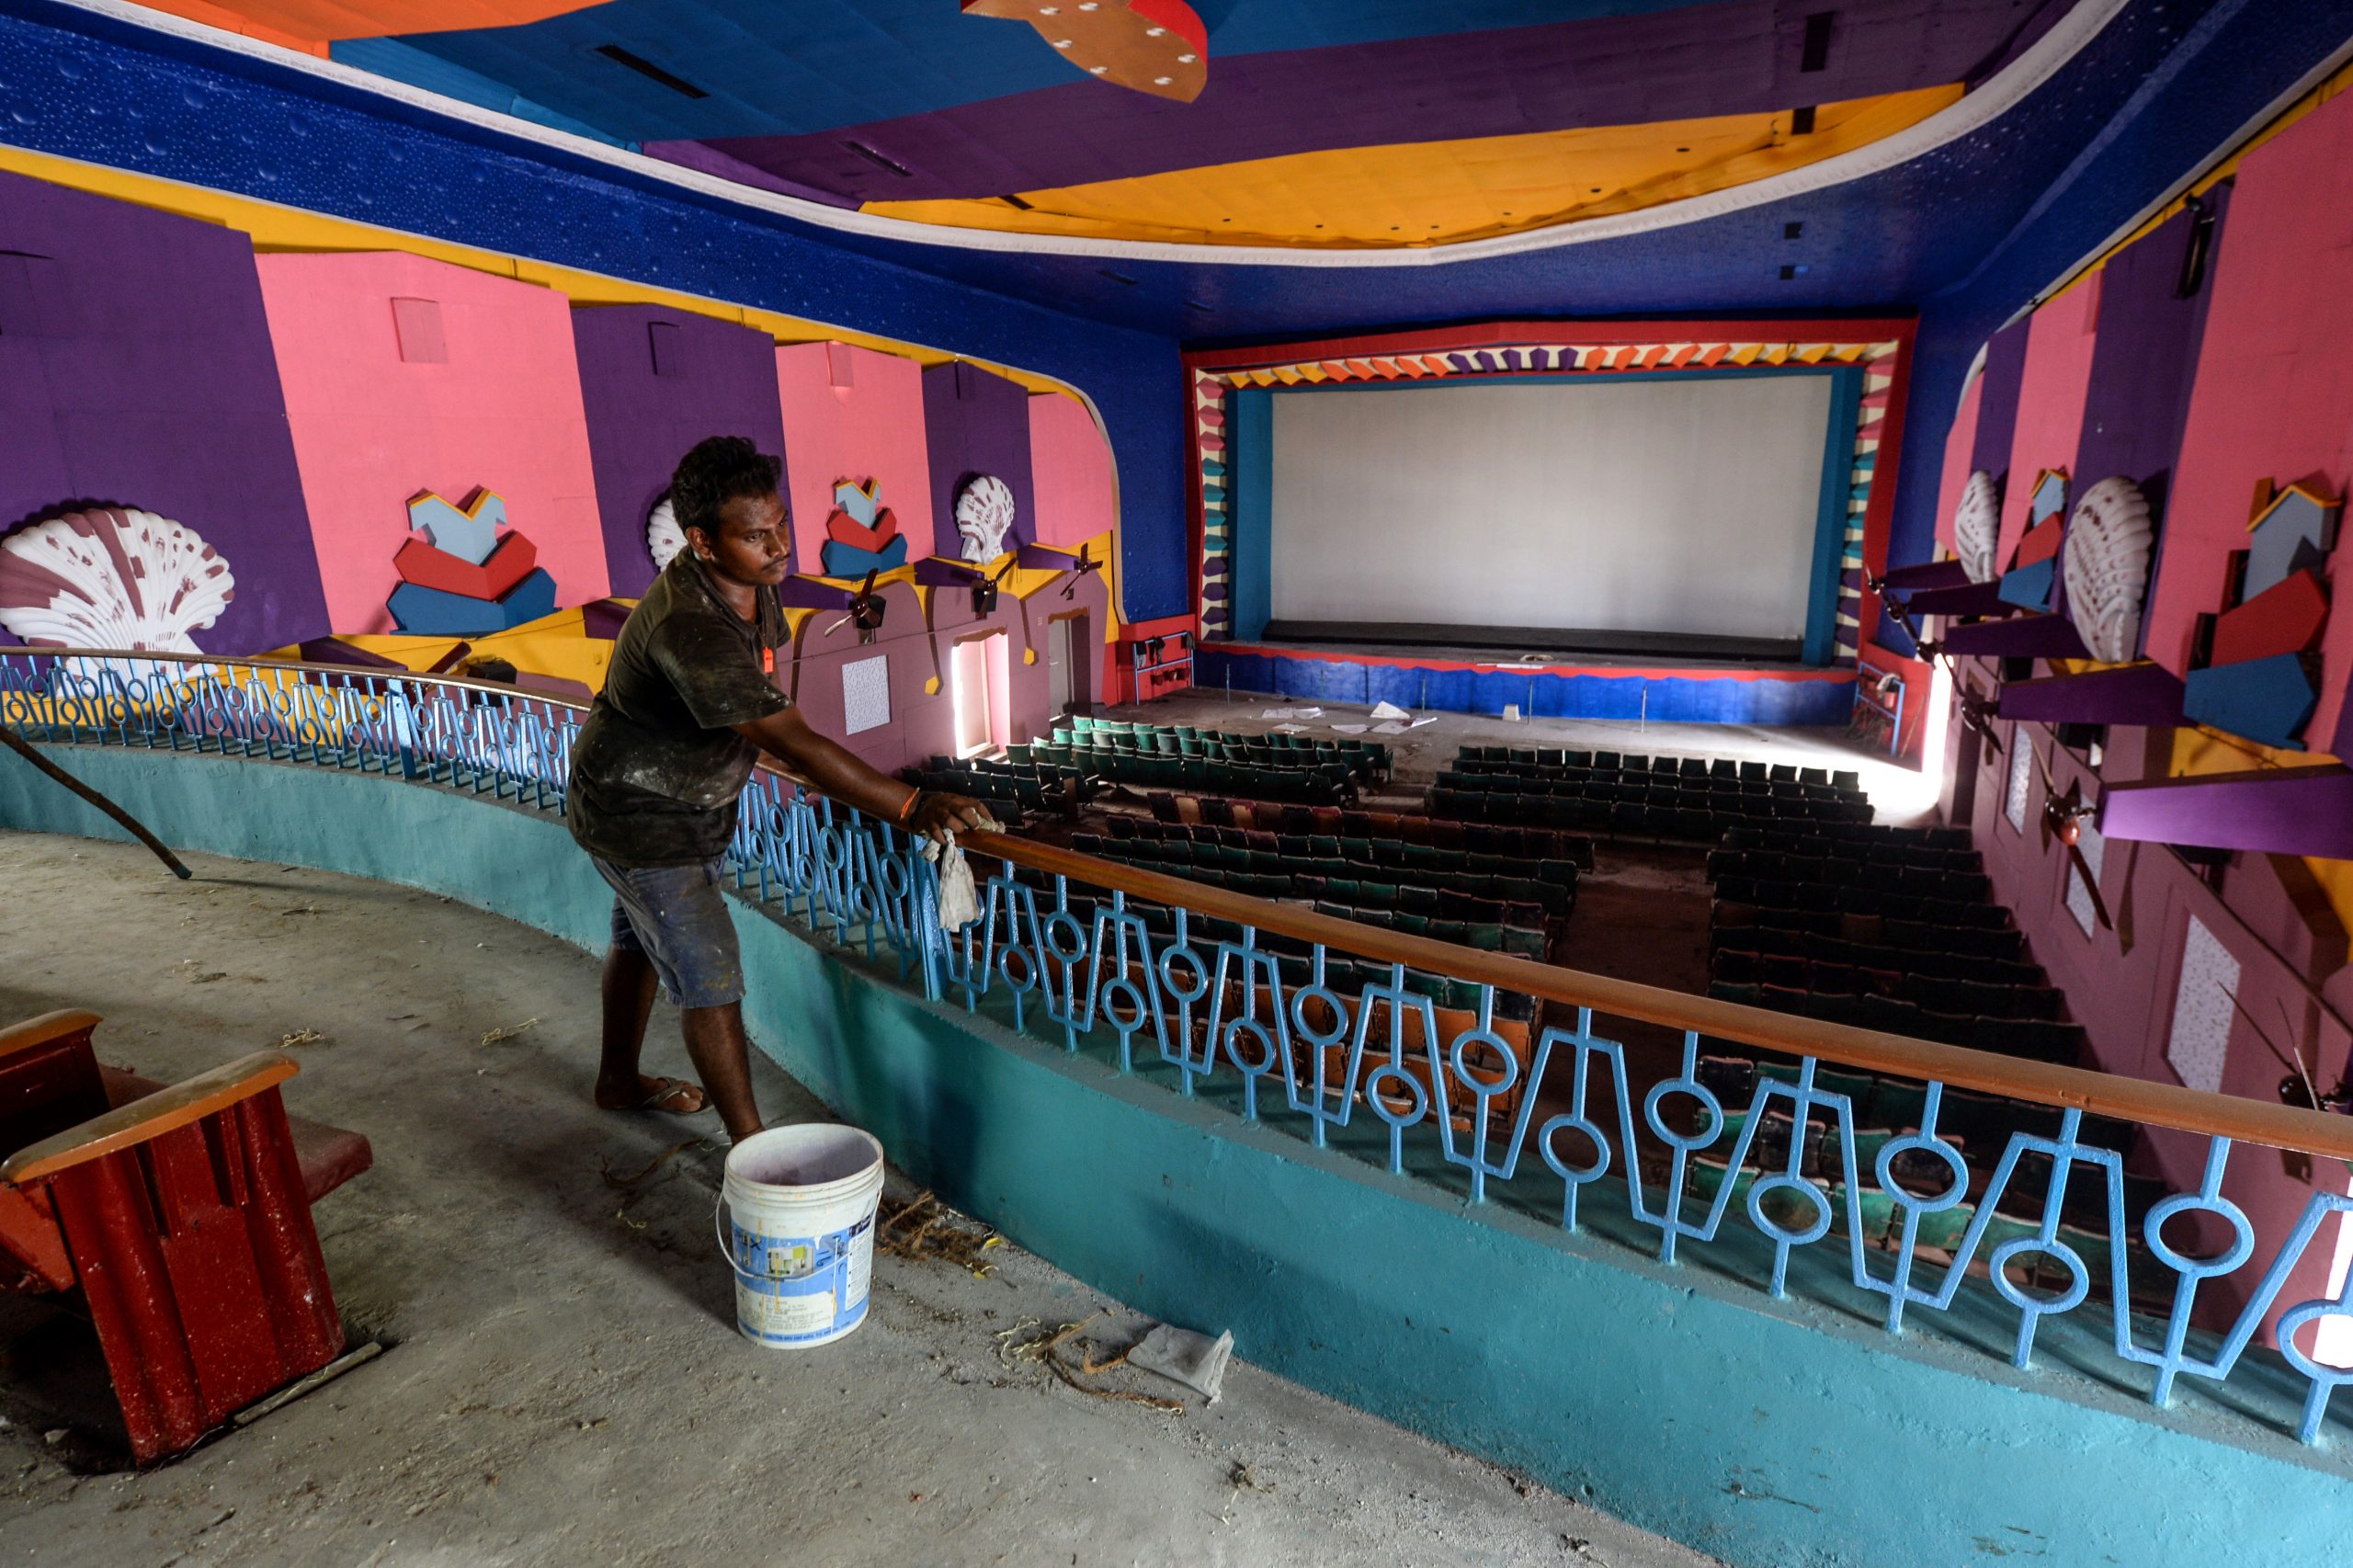 Cinema halls to reopen on Oct 15 with 50% capacity, one-seat distance